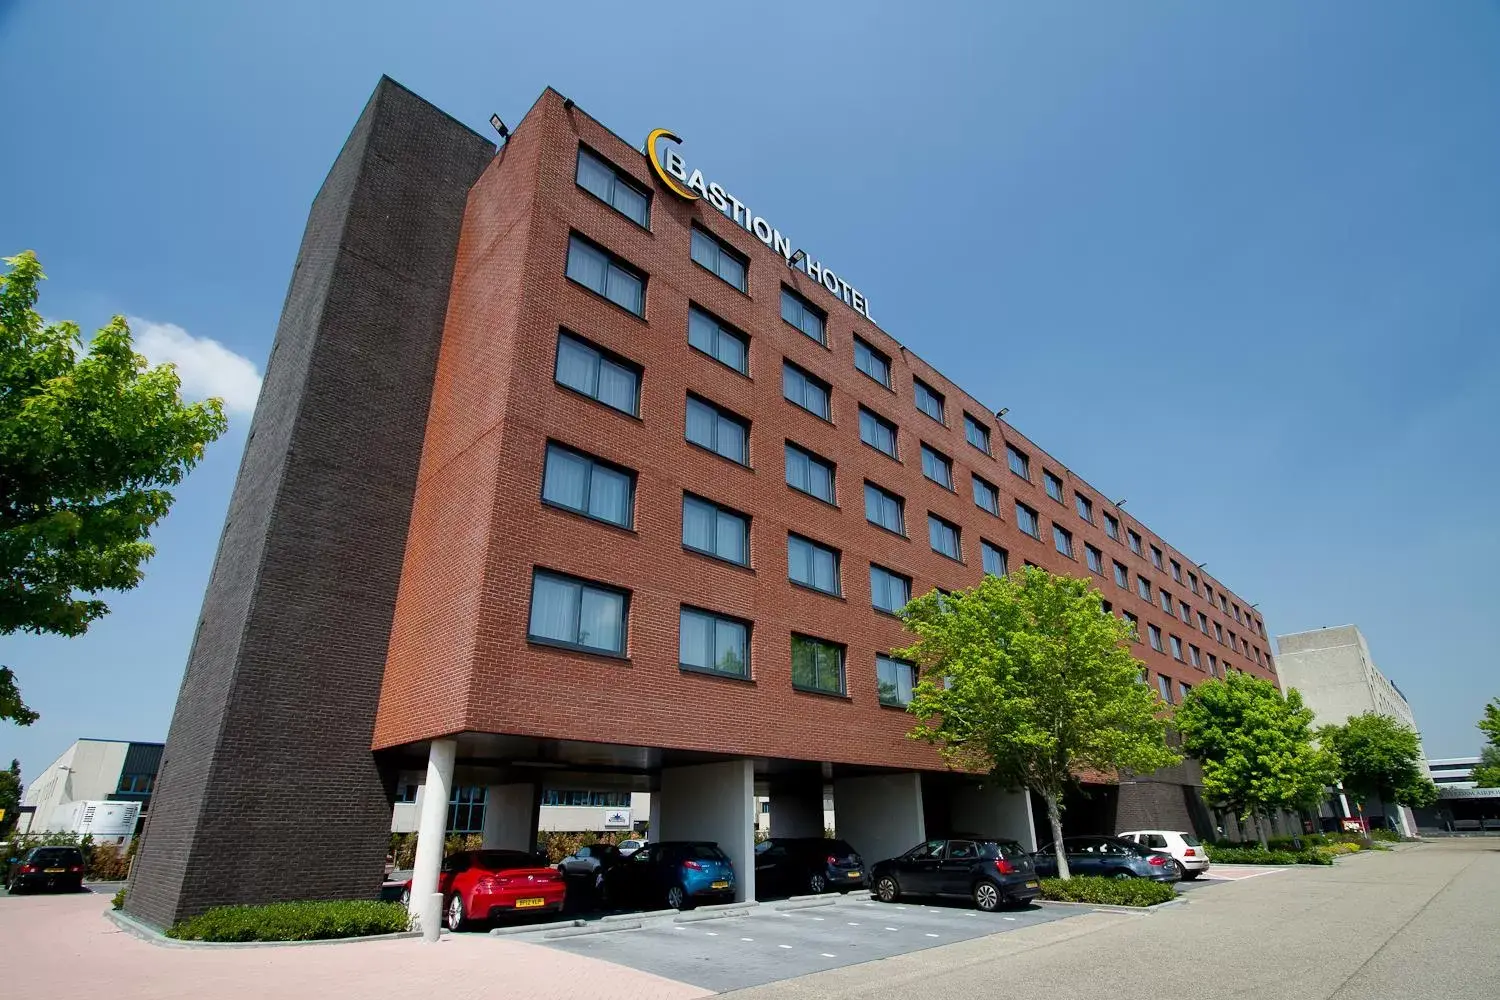 Property Building in Bastion Hotel Amsterdam Airport